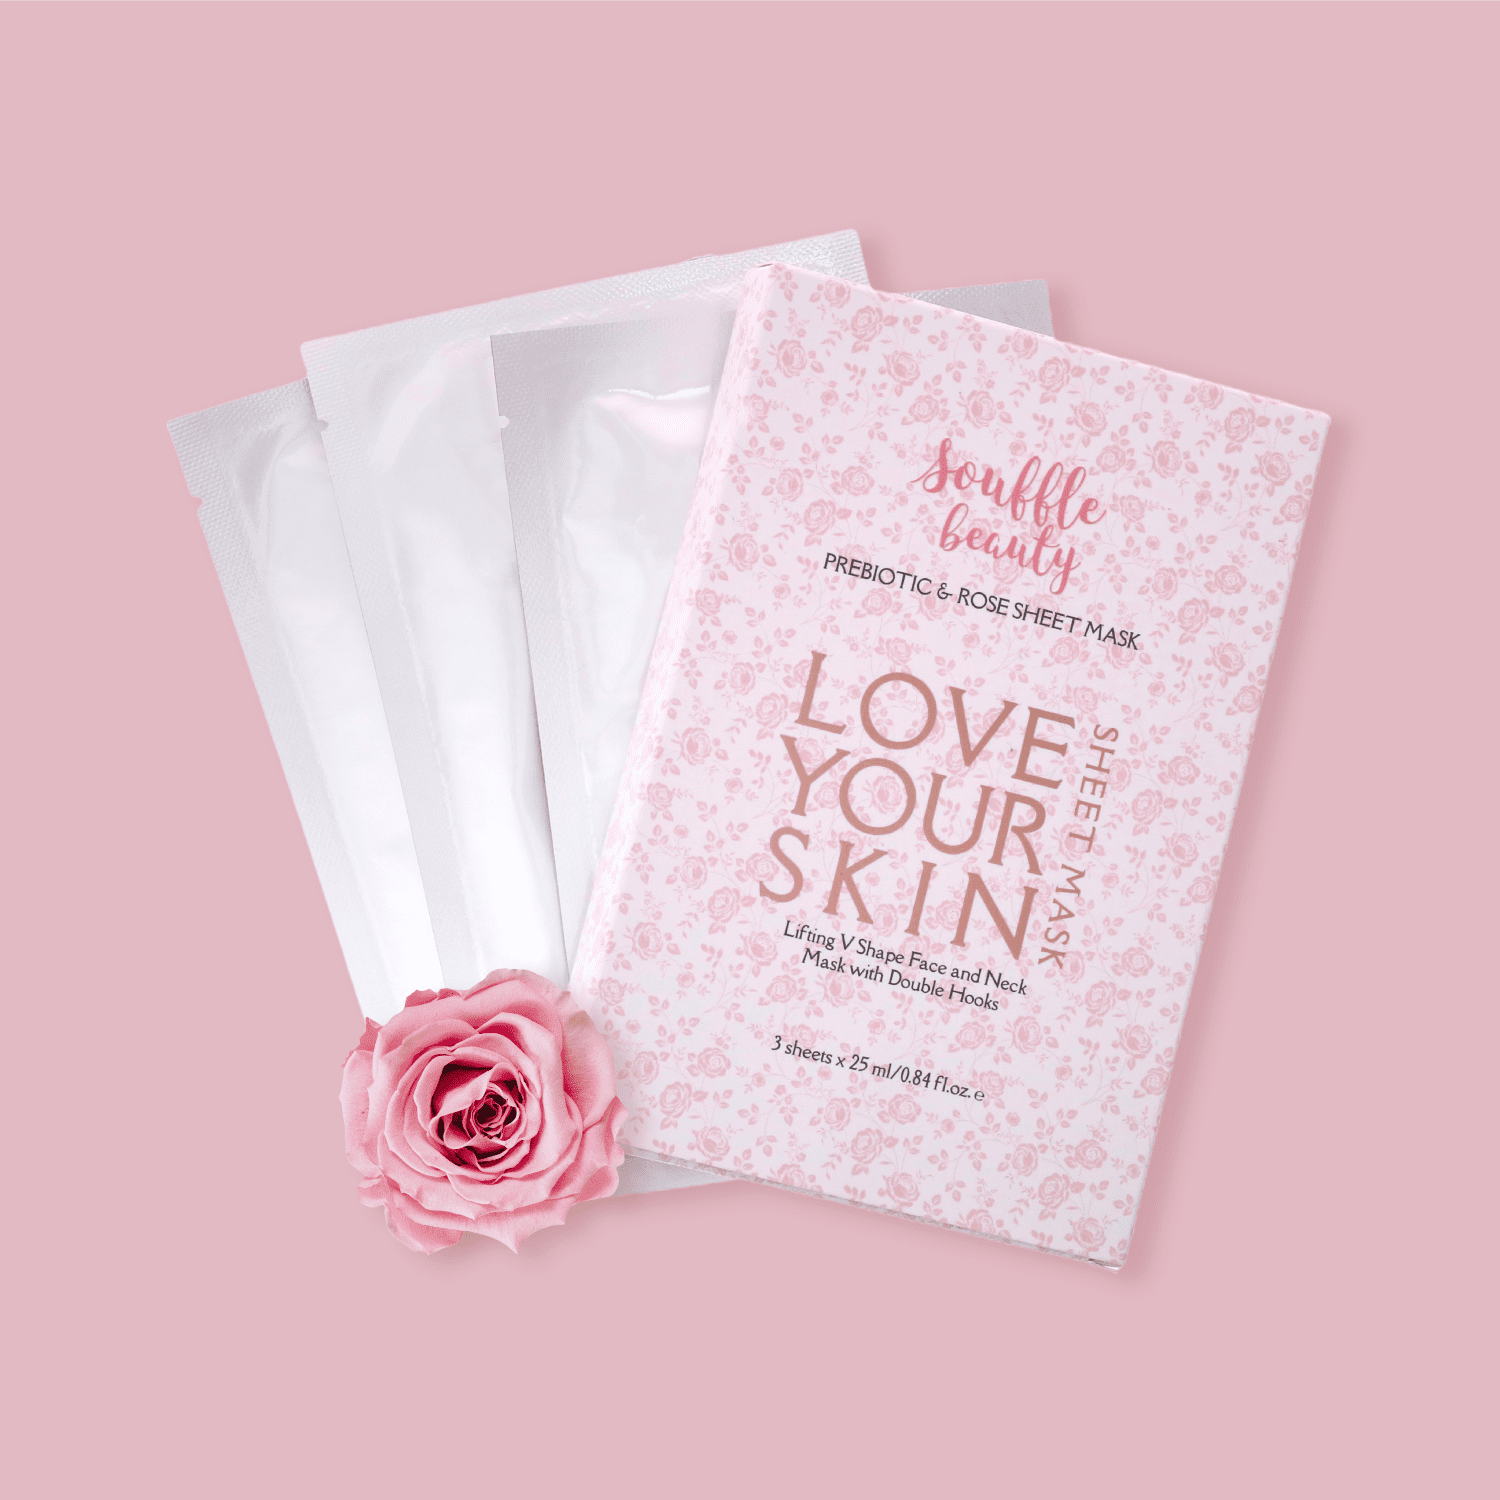 Prebiotic & Rose Sheet Mask With Double Hooks by Souffle Beauty